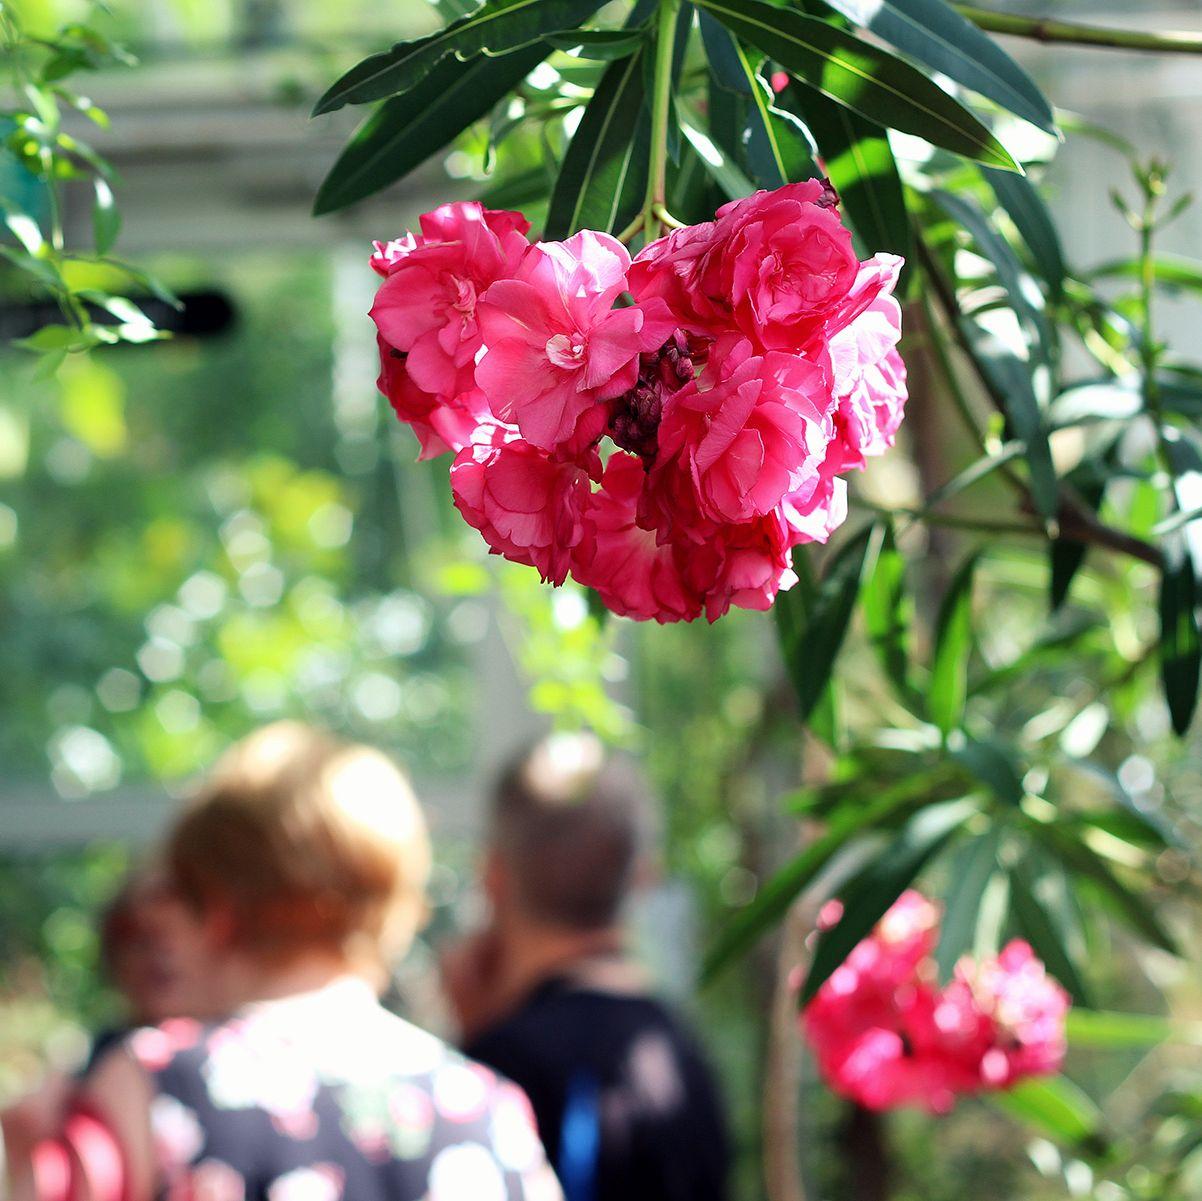 Pink flowers blossom at the Botanic Gardens, while visitors stand in the background.